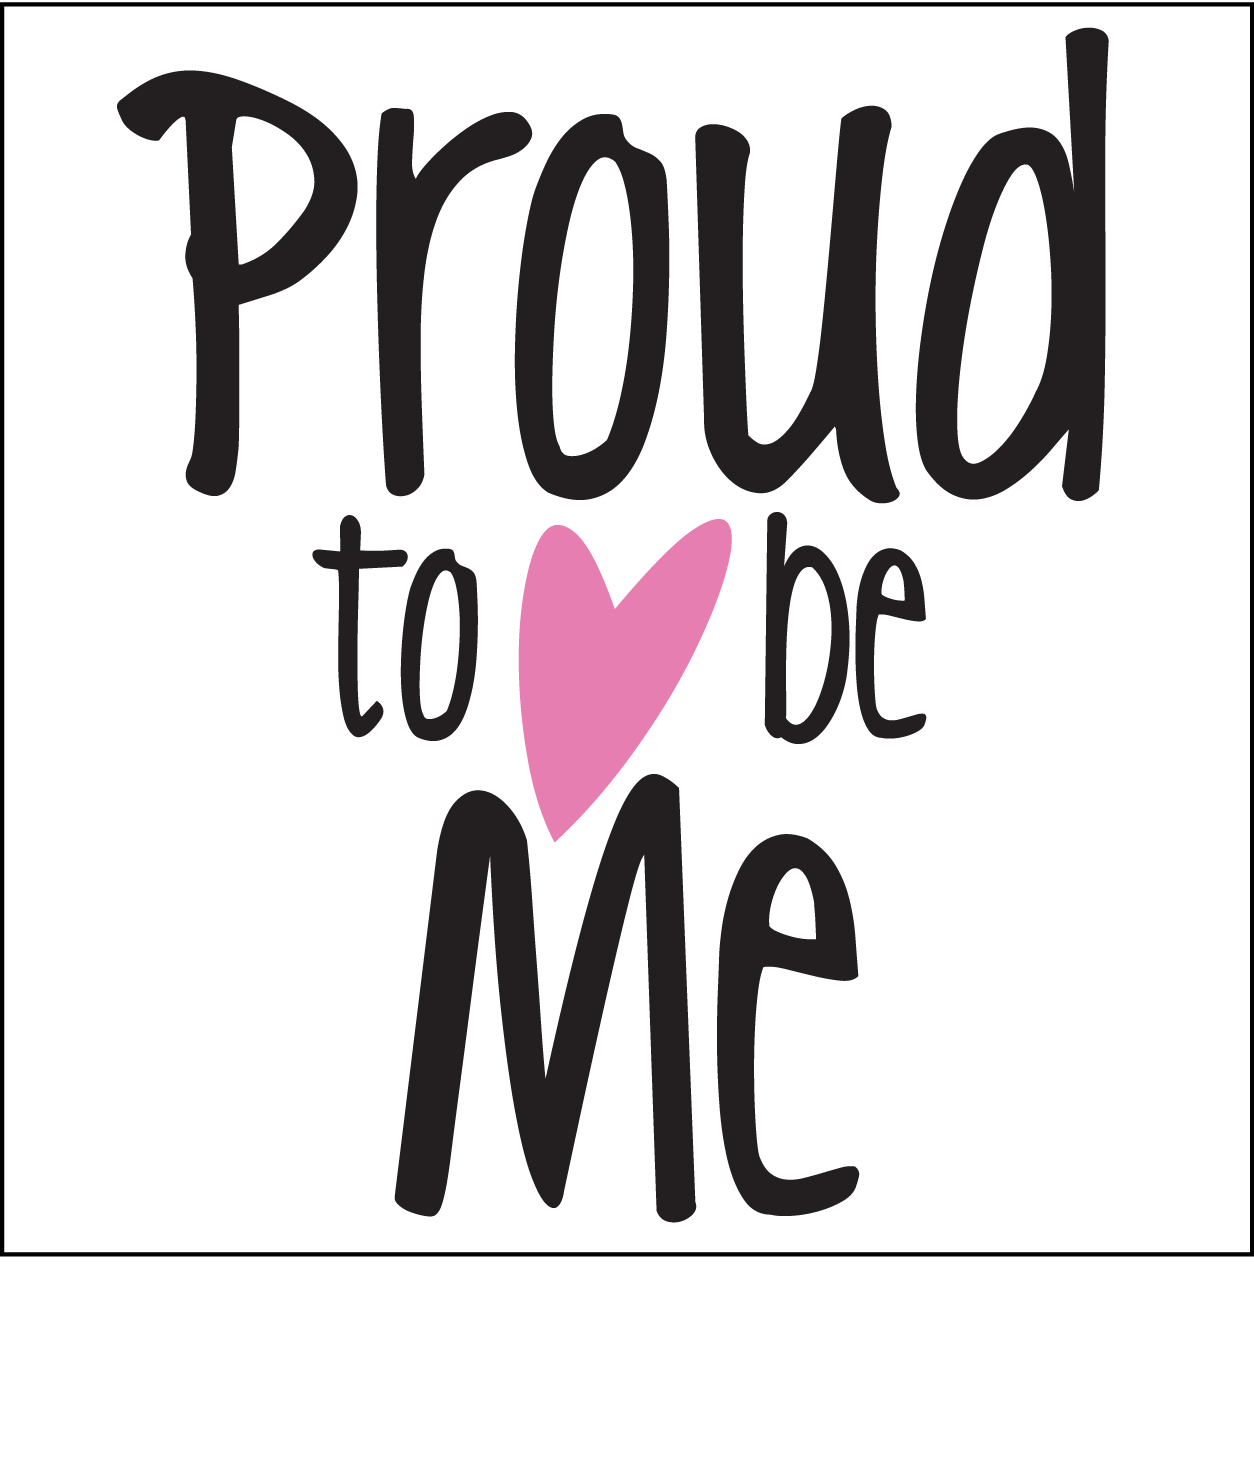 Proud to be me